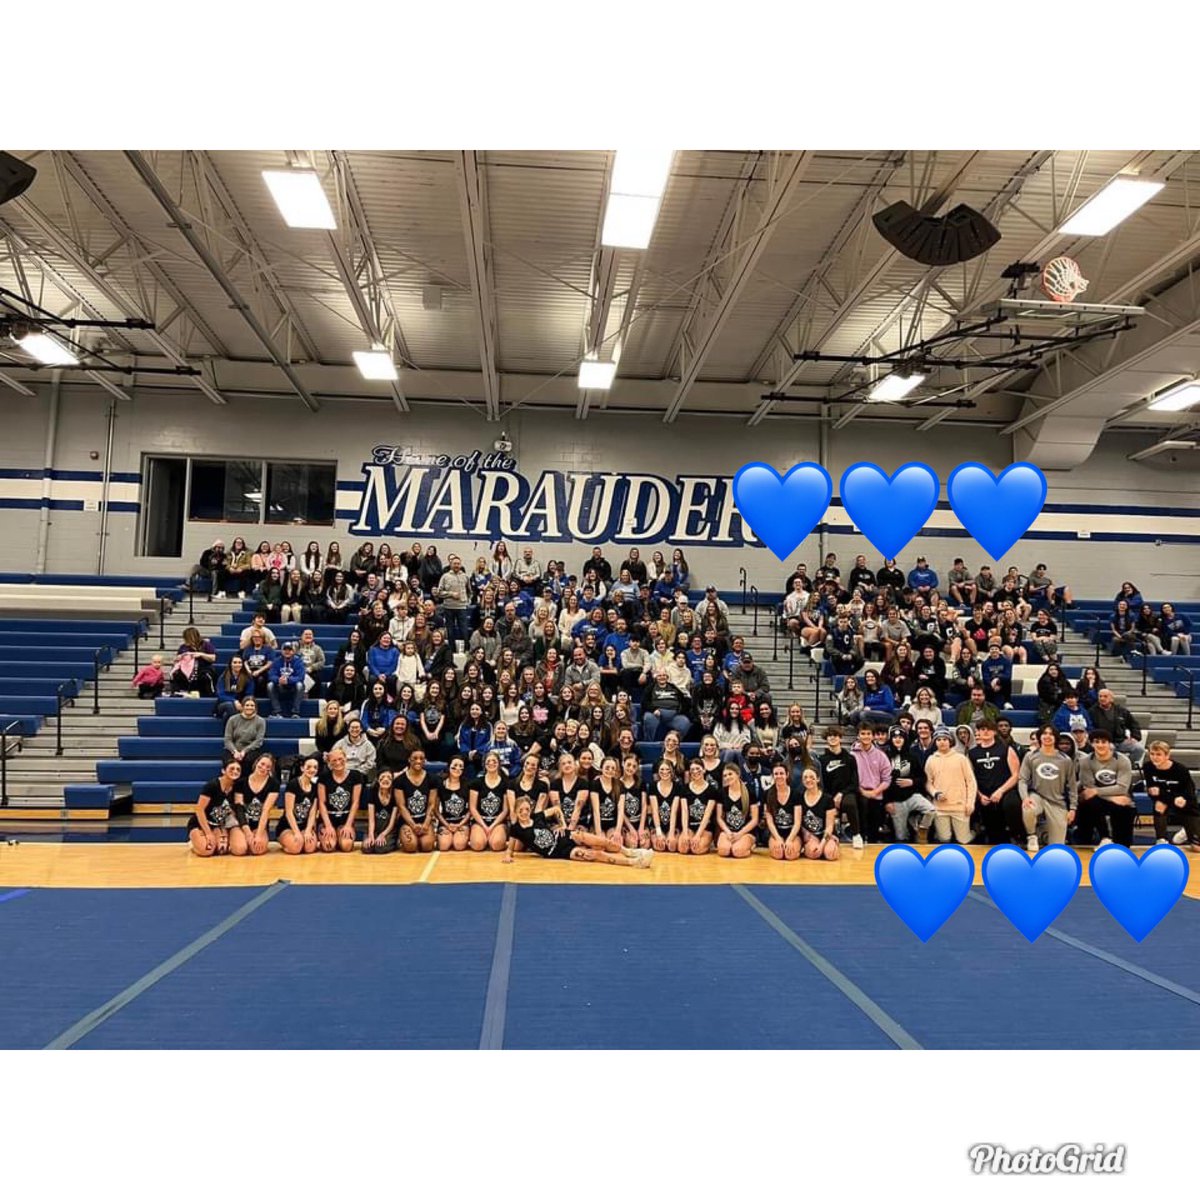 What a send off for @CarlsonCheer last night! Good luck, ladies! If you look between the hearts, there were a tremendous amount of students from our other teams there in support. Just one more reason there’s nothing like being a Marauder! 💙